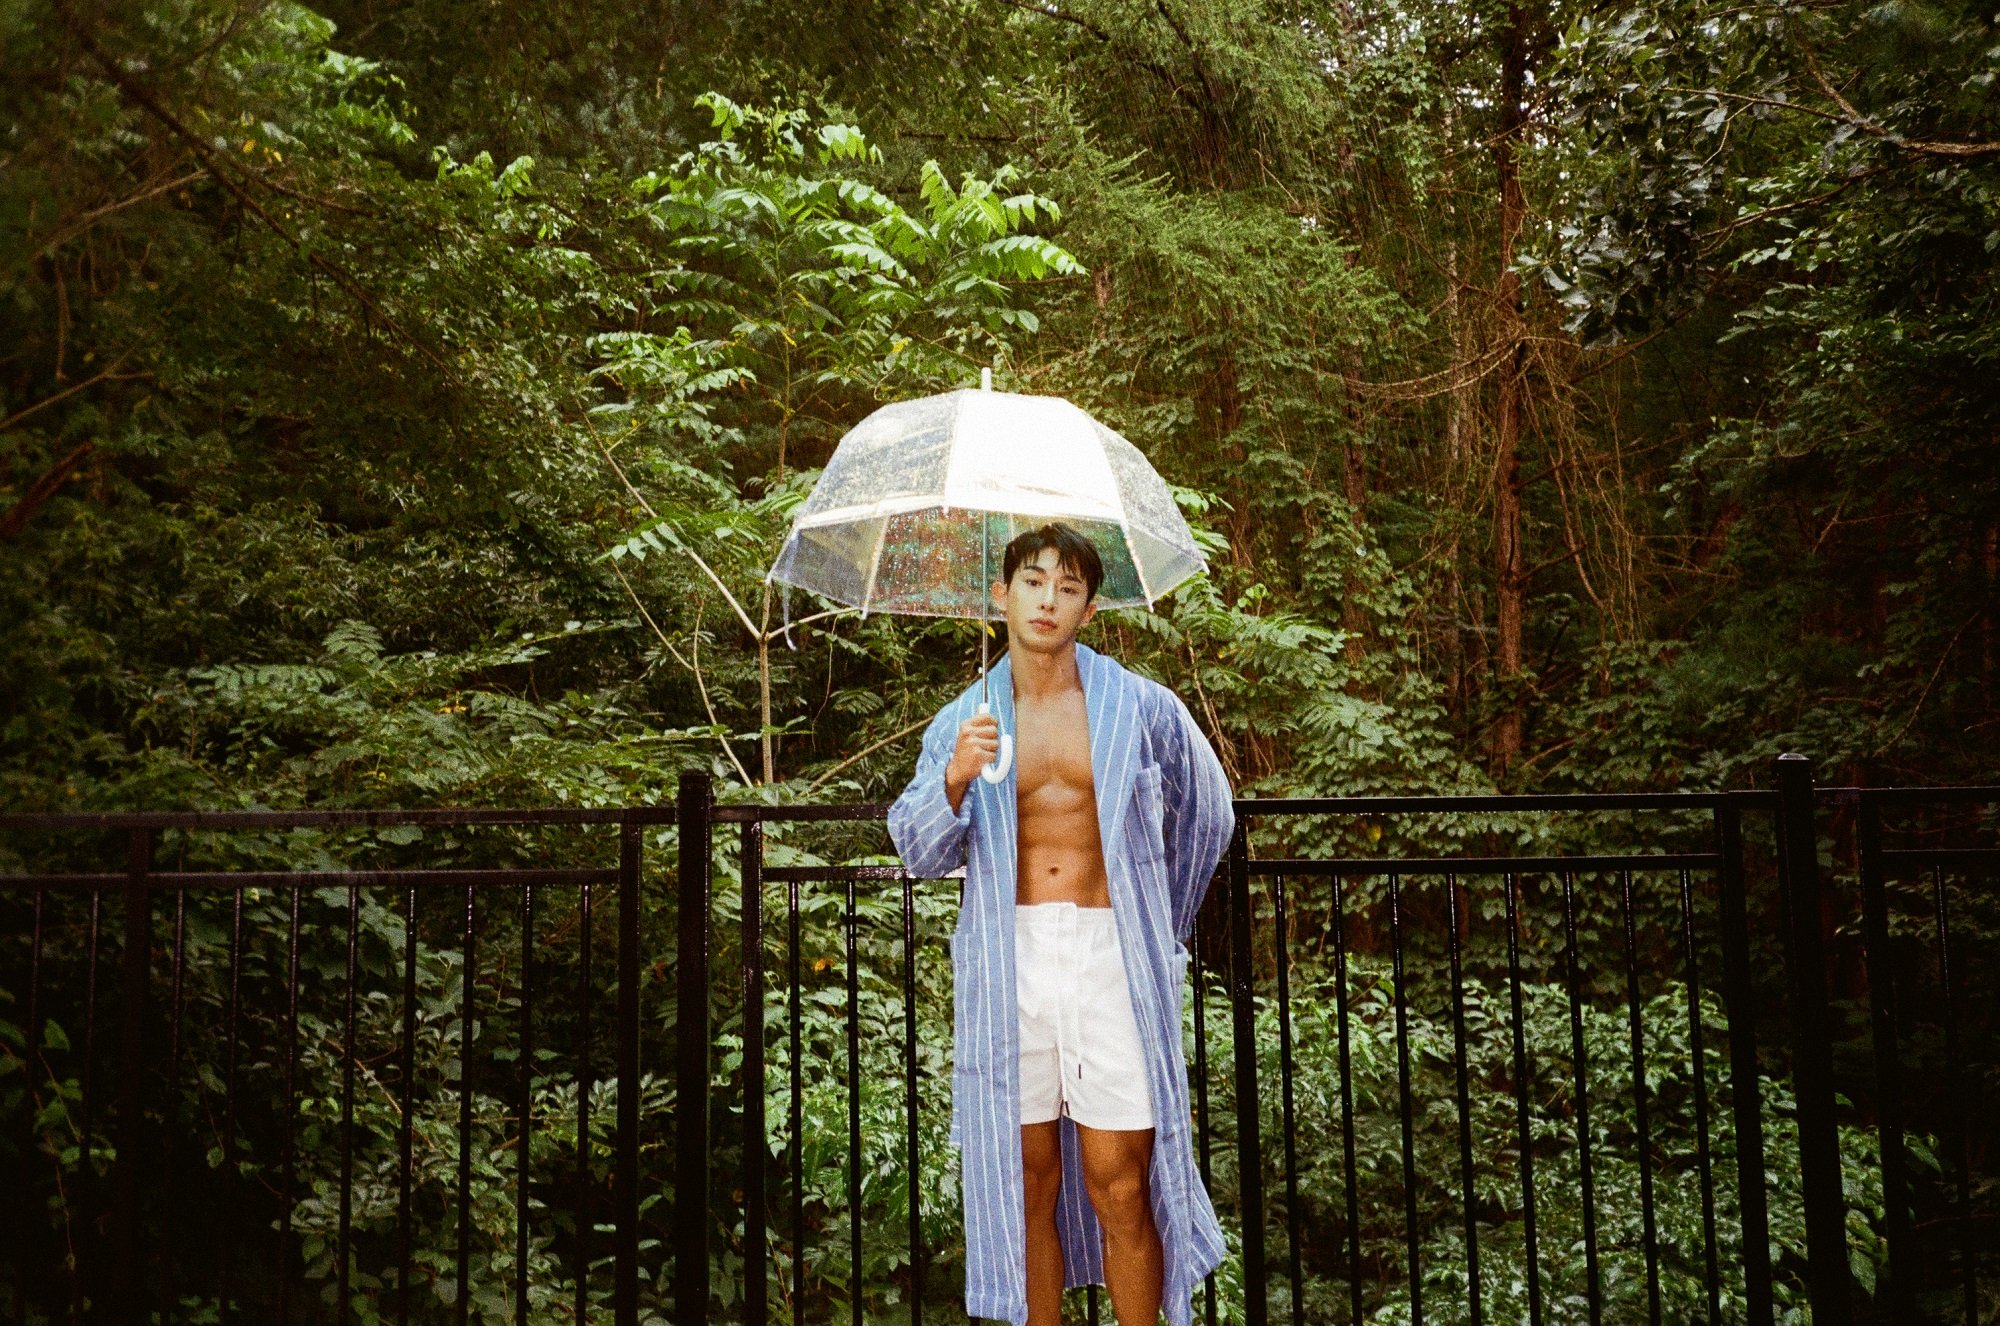 Wonho holds a clear umbrella while wearing a blue-striped robe and white shorts